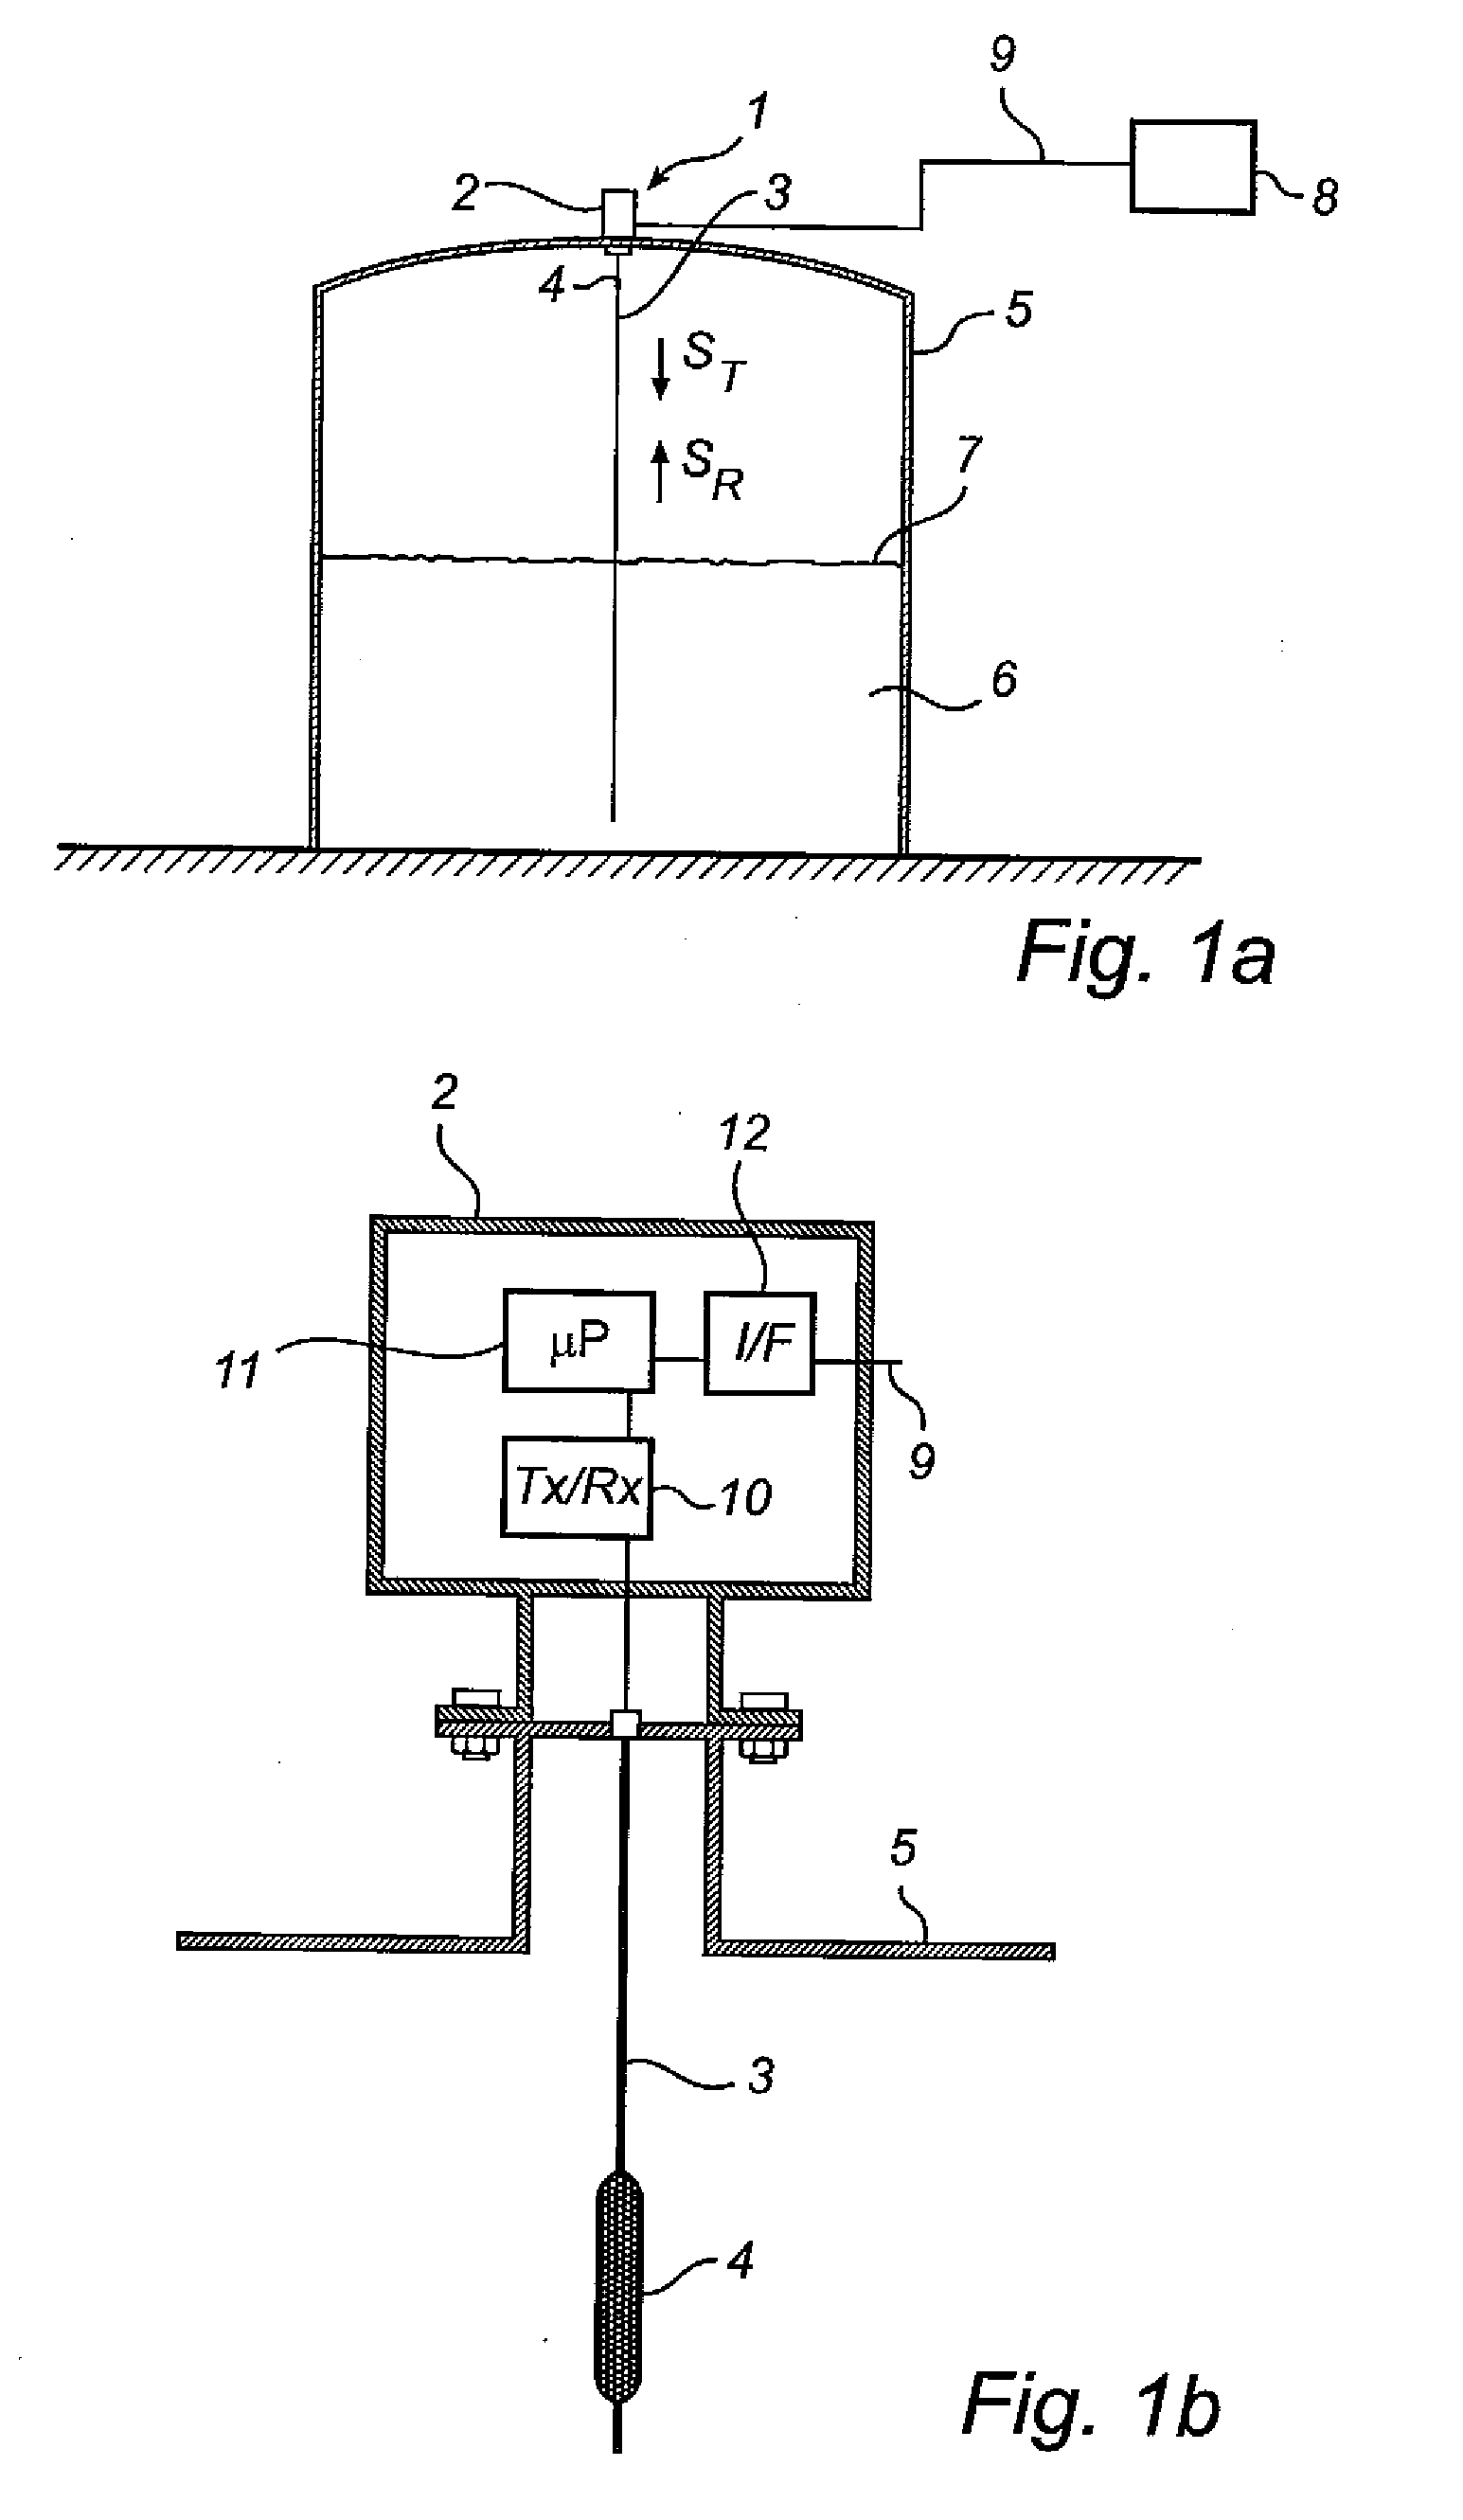 Method and device for providing an indication of the reliability of a process parameter value to a host system